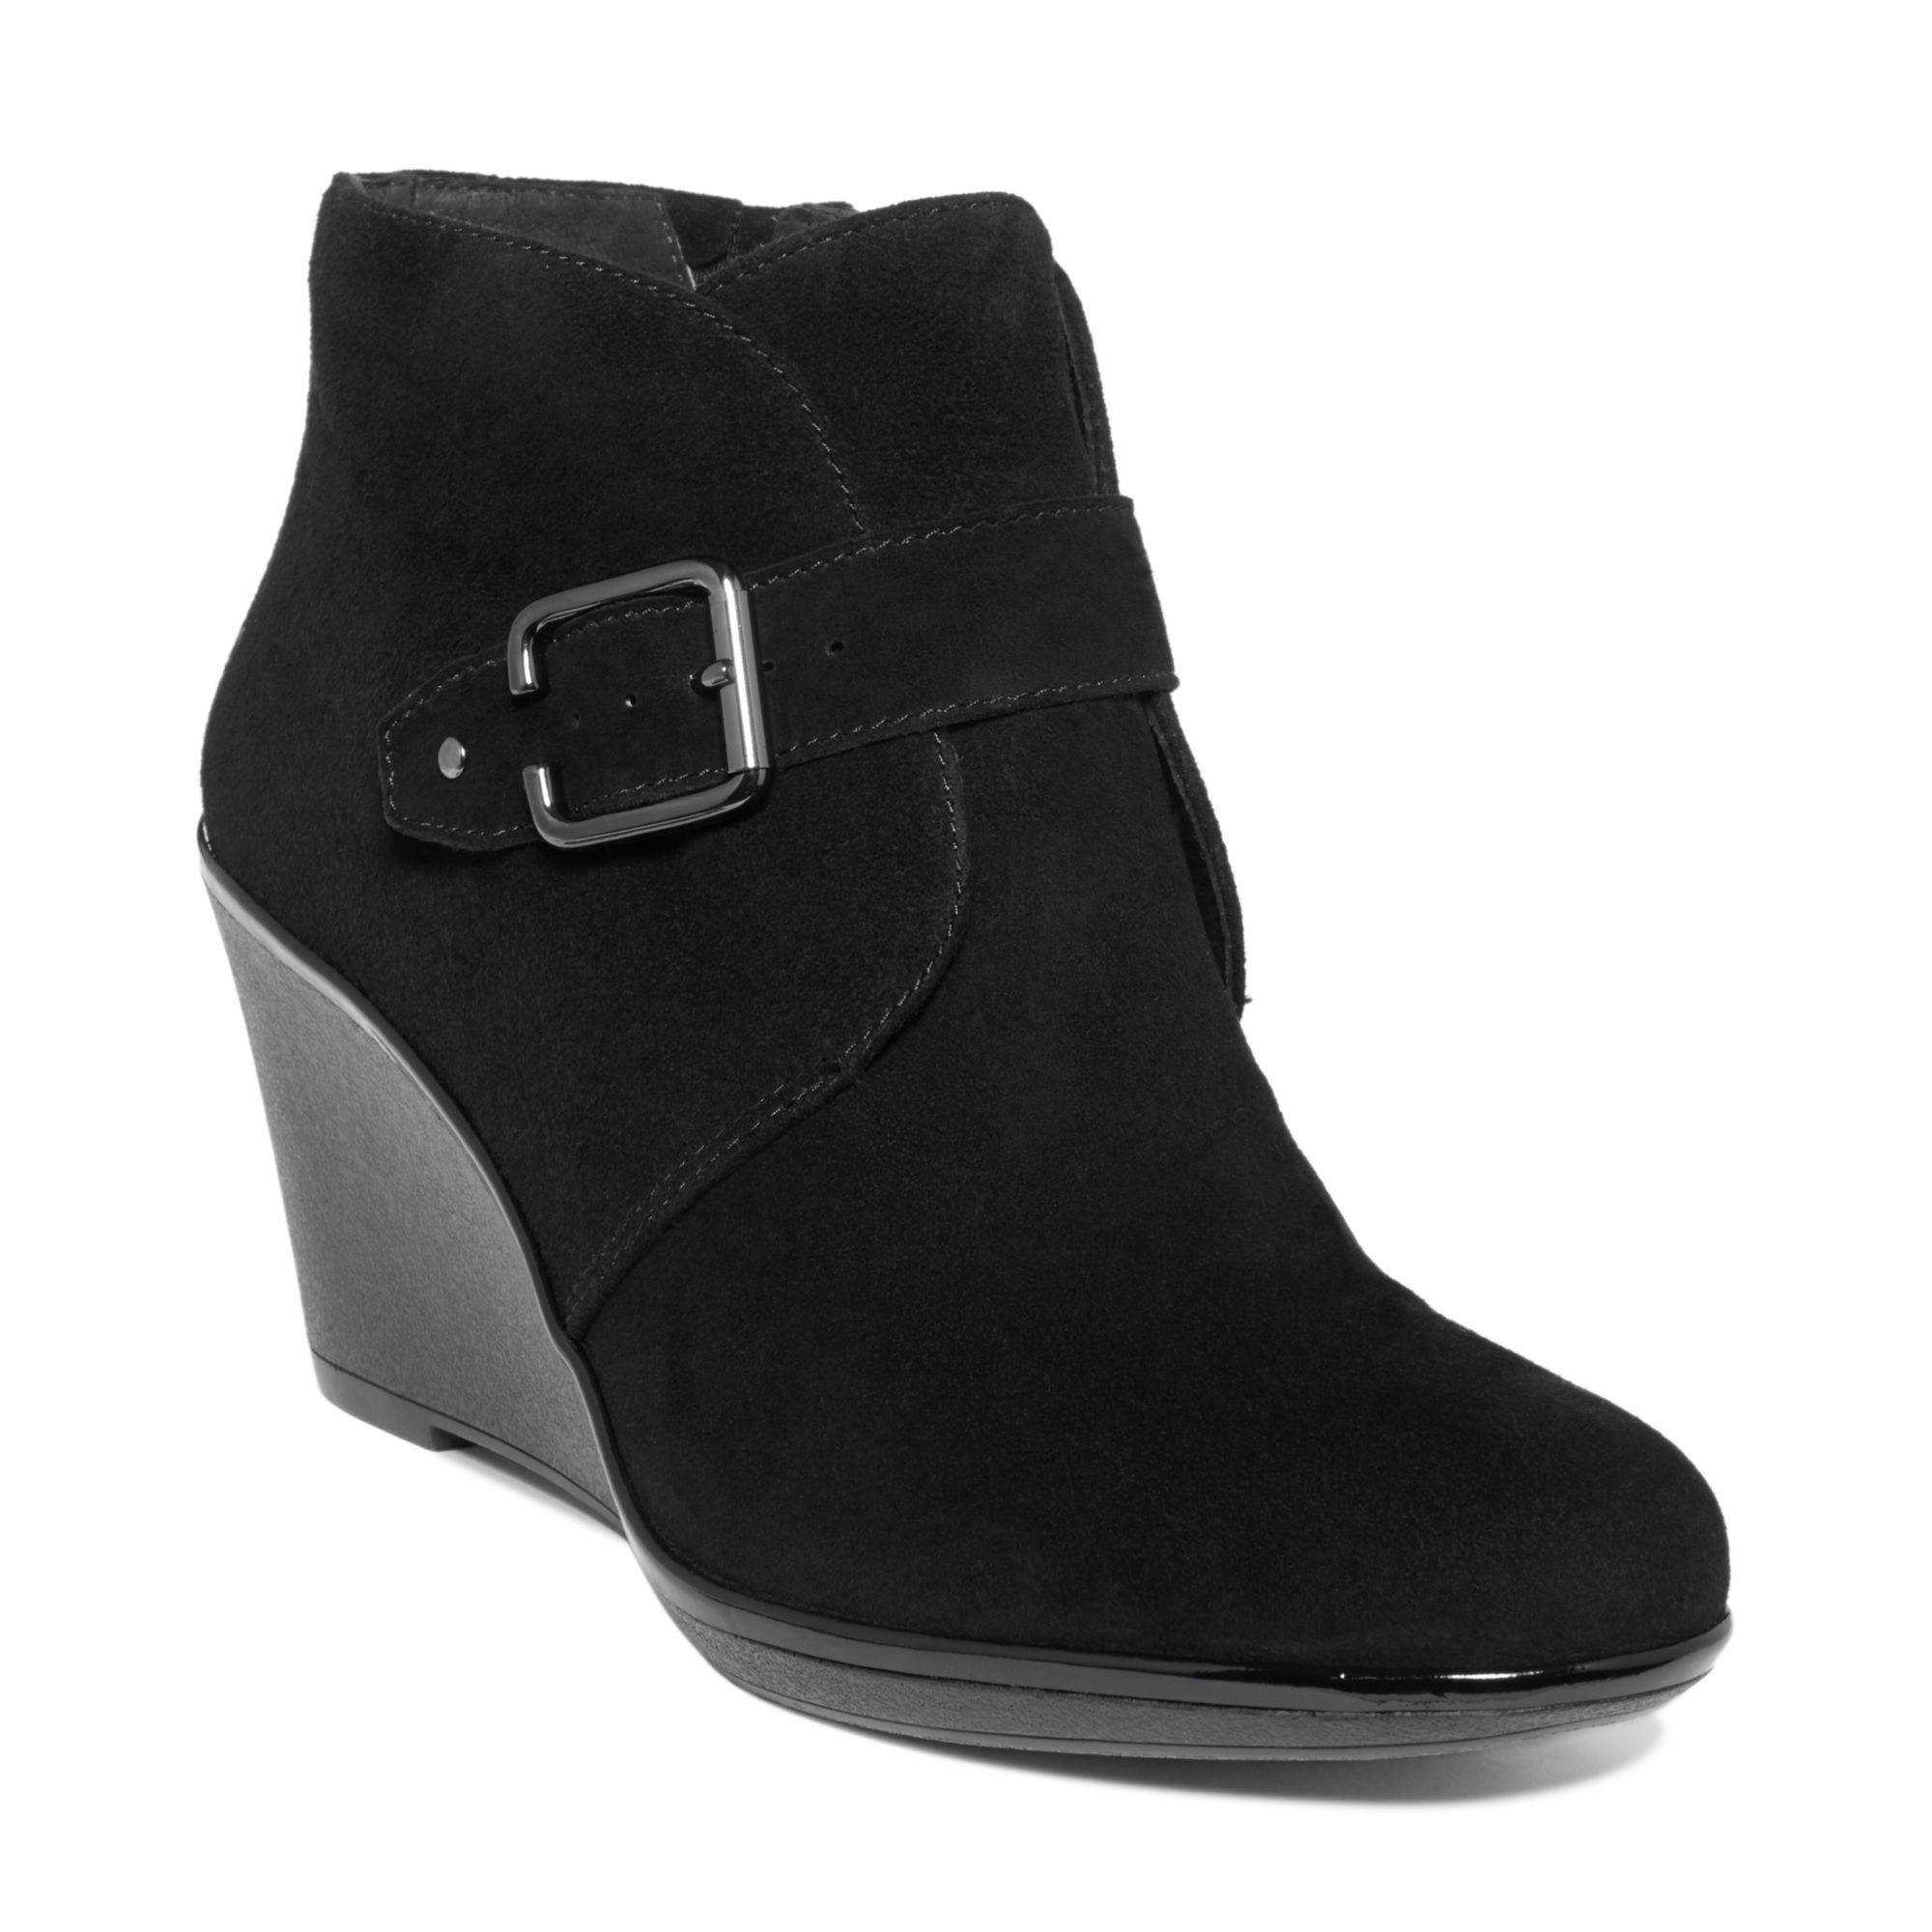 Lyst - Clarks Daylily Surety Wedge Booties in Black